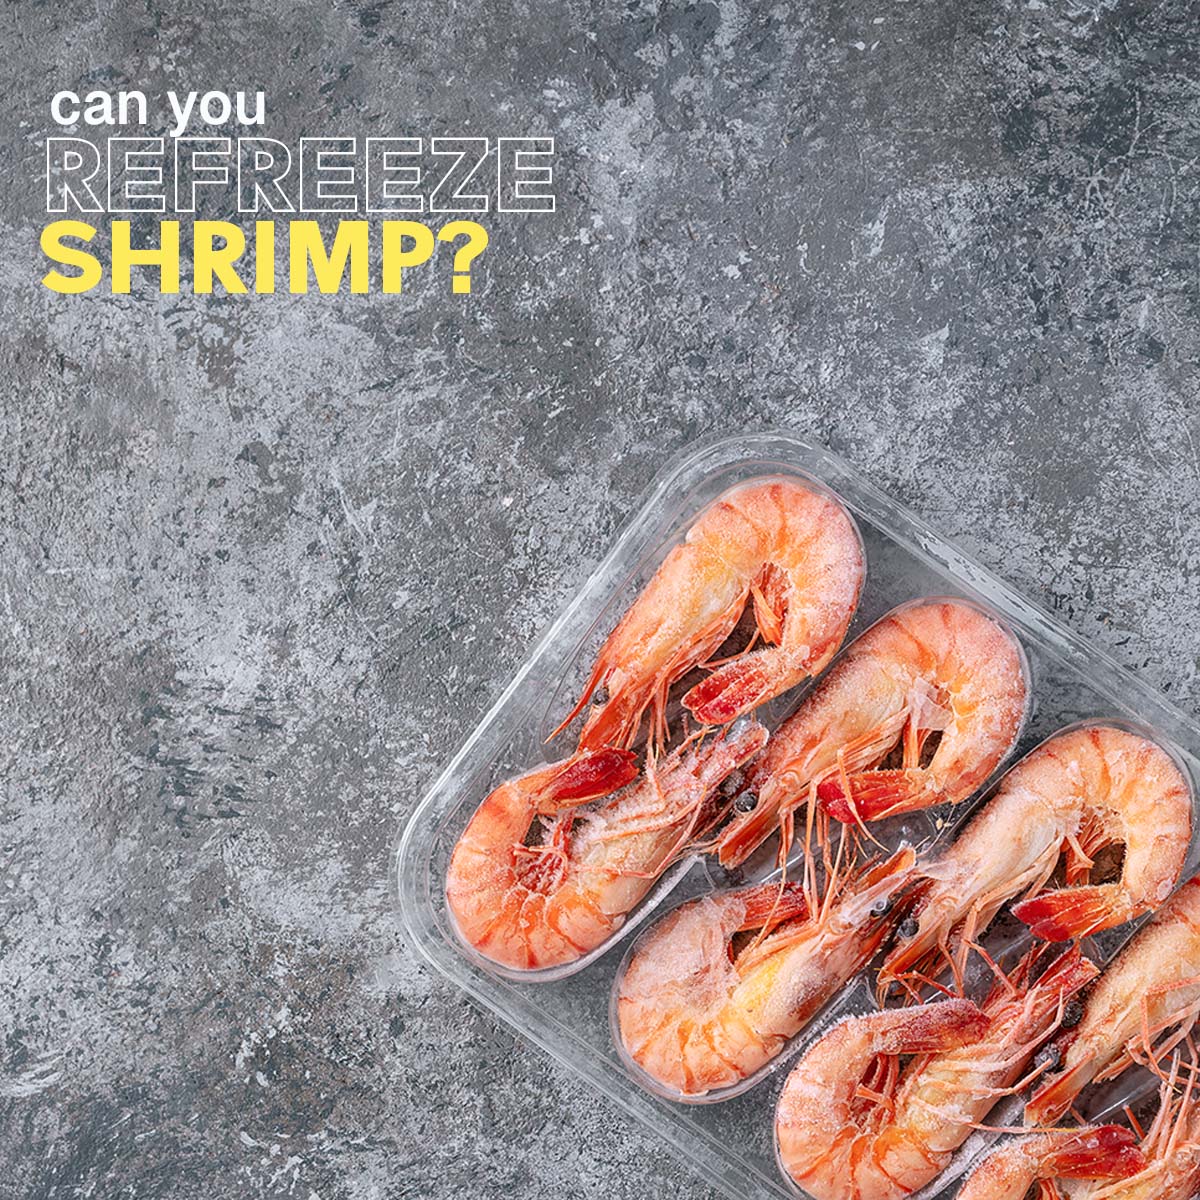 The safest way to thaw shrimp is in the fridge. It takes 12 to 24 hours to defrost shrimp in the refrigerator; hence, refreezing is safe without compromising taste or texture. 